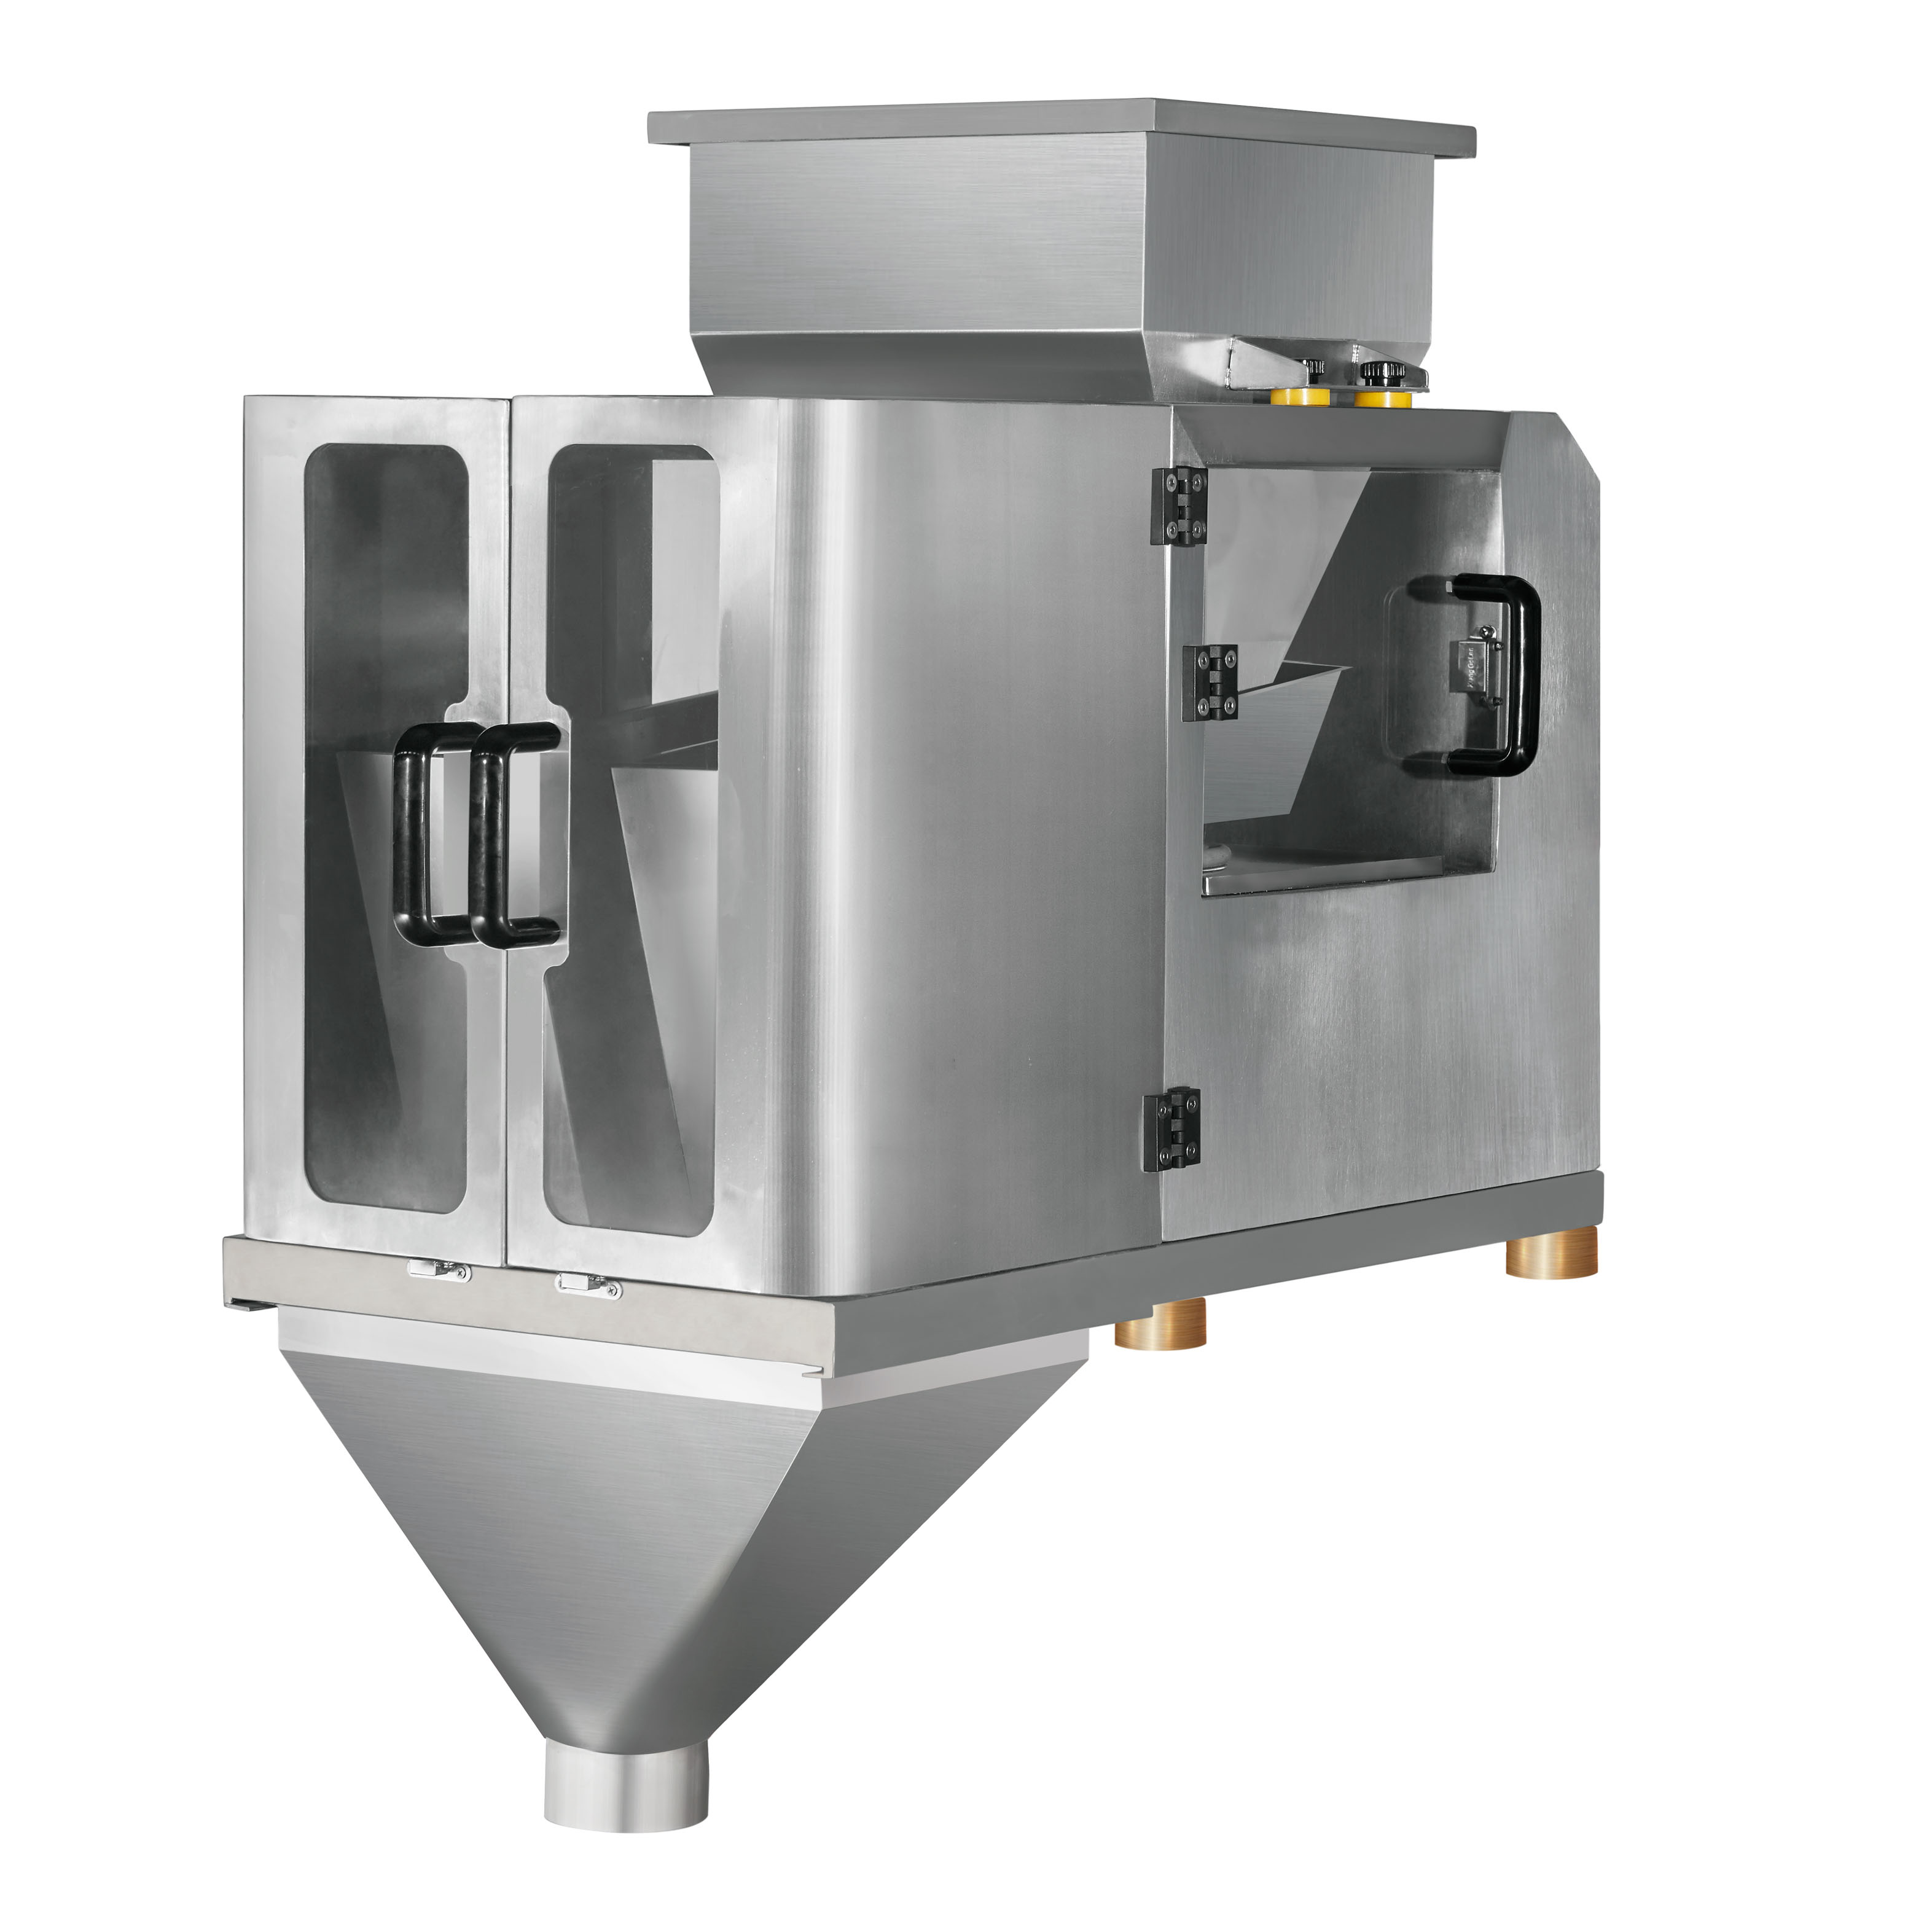 Linear Weigher Featured Image